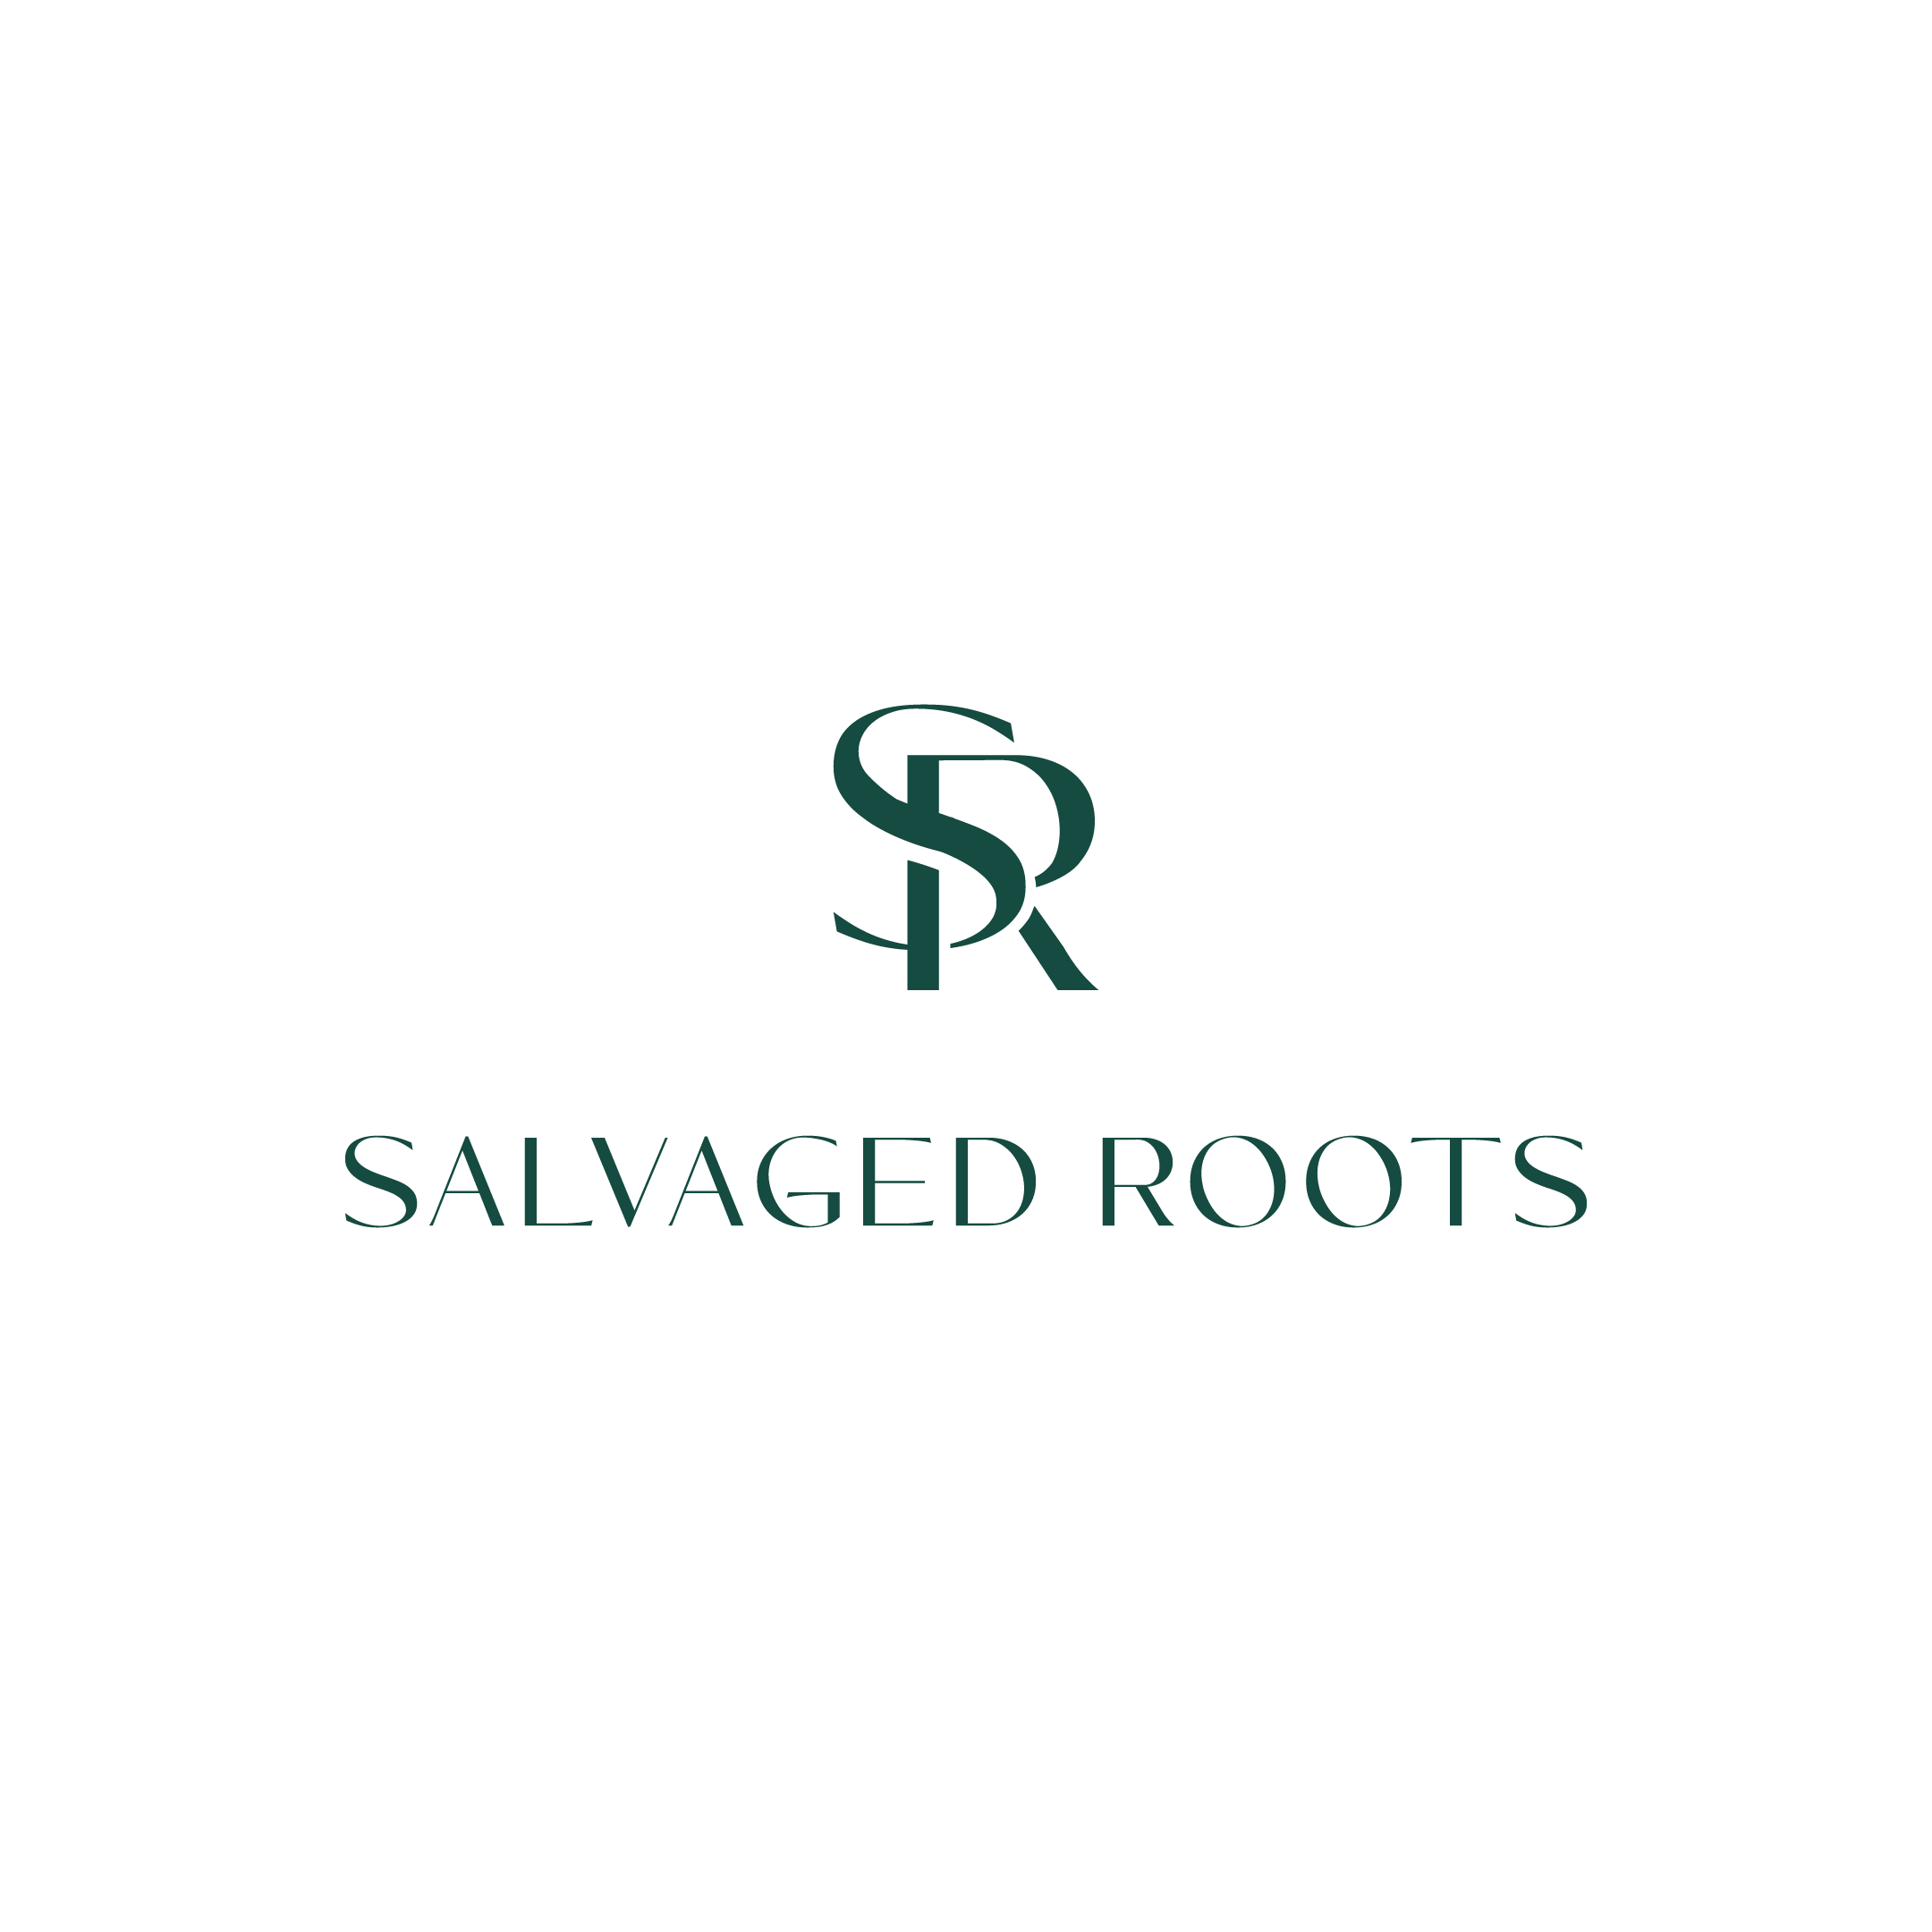 SALVAGED ROOTS